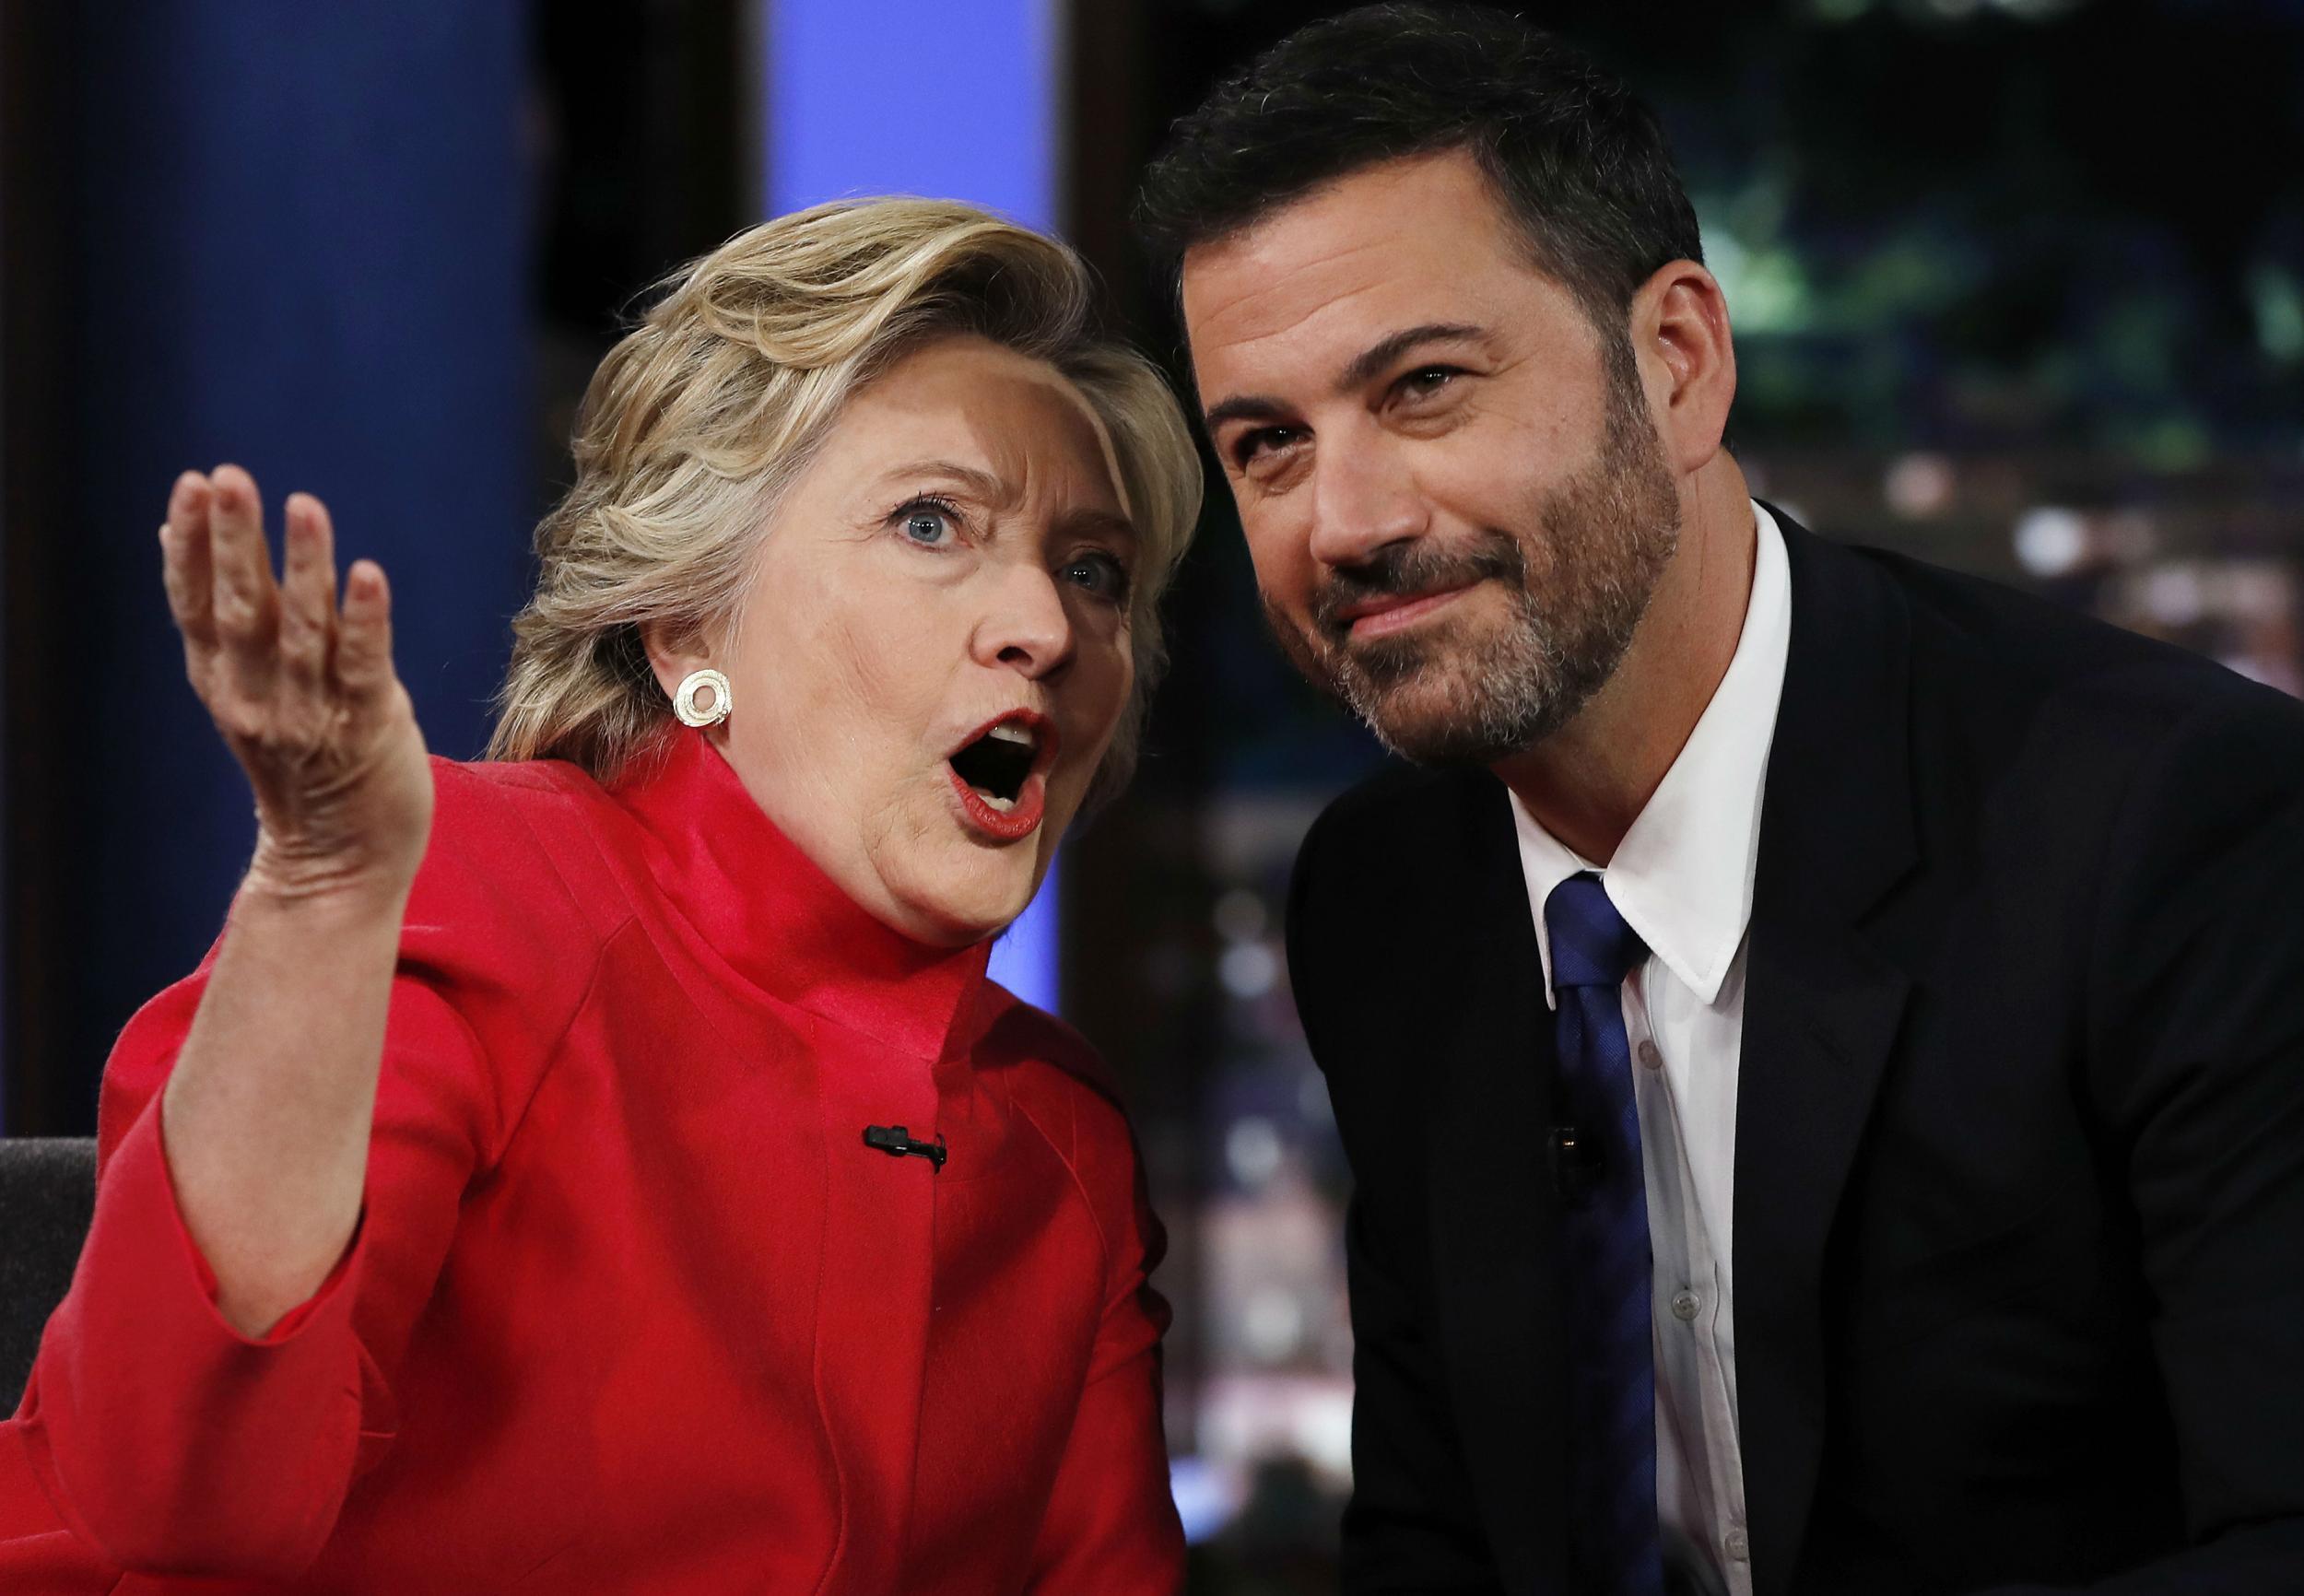 The Democratic nominee downplayed her email troubles on ‘Jimmy Kimmel Live’ on Monday